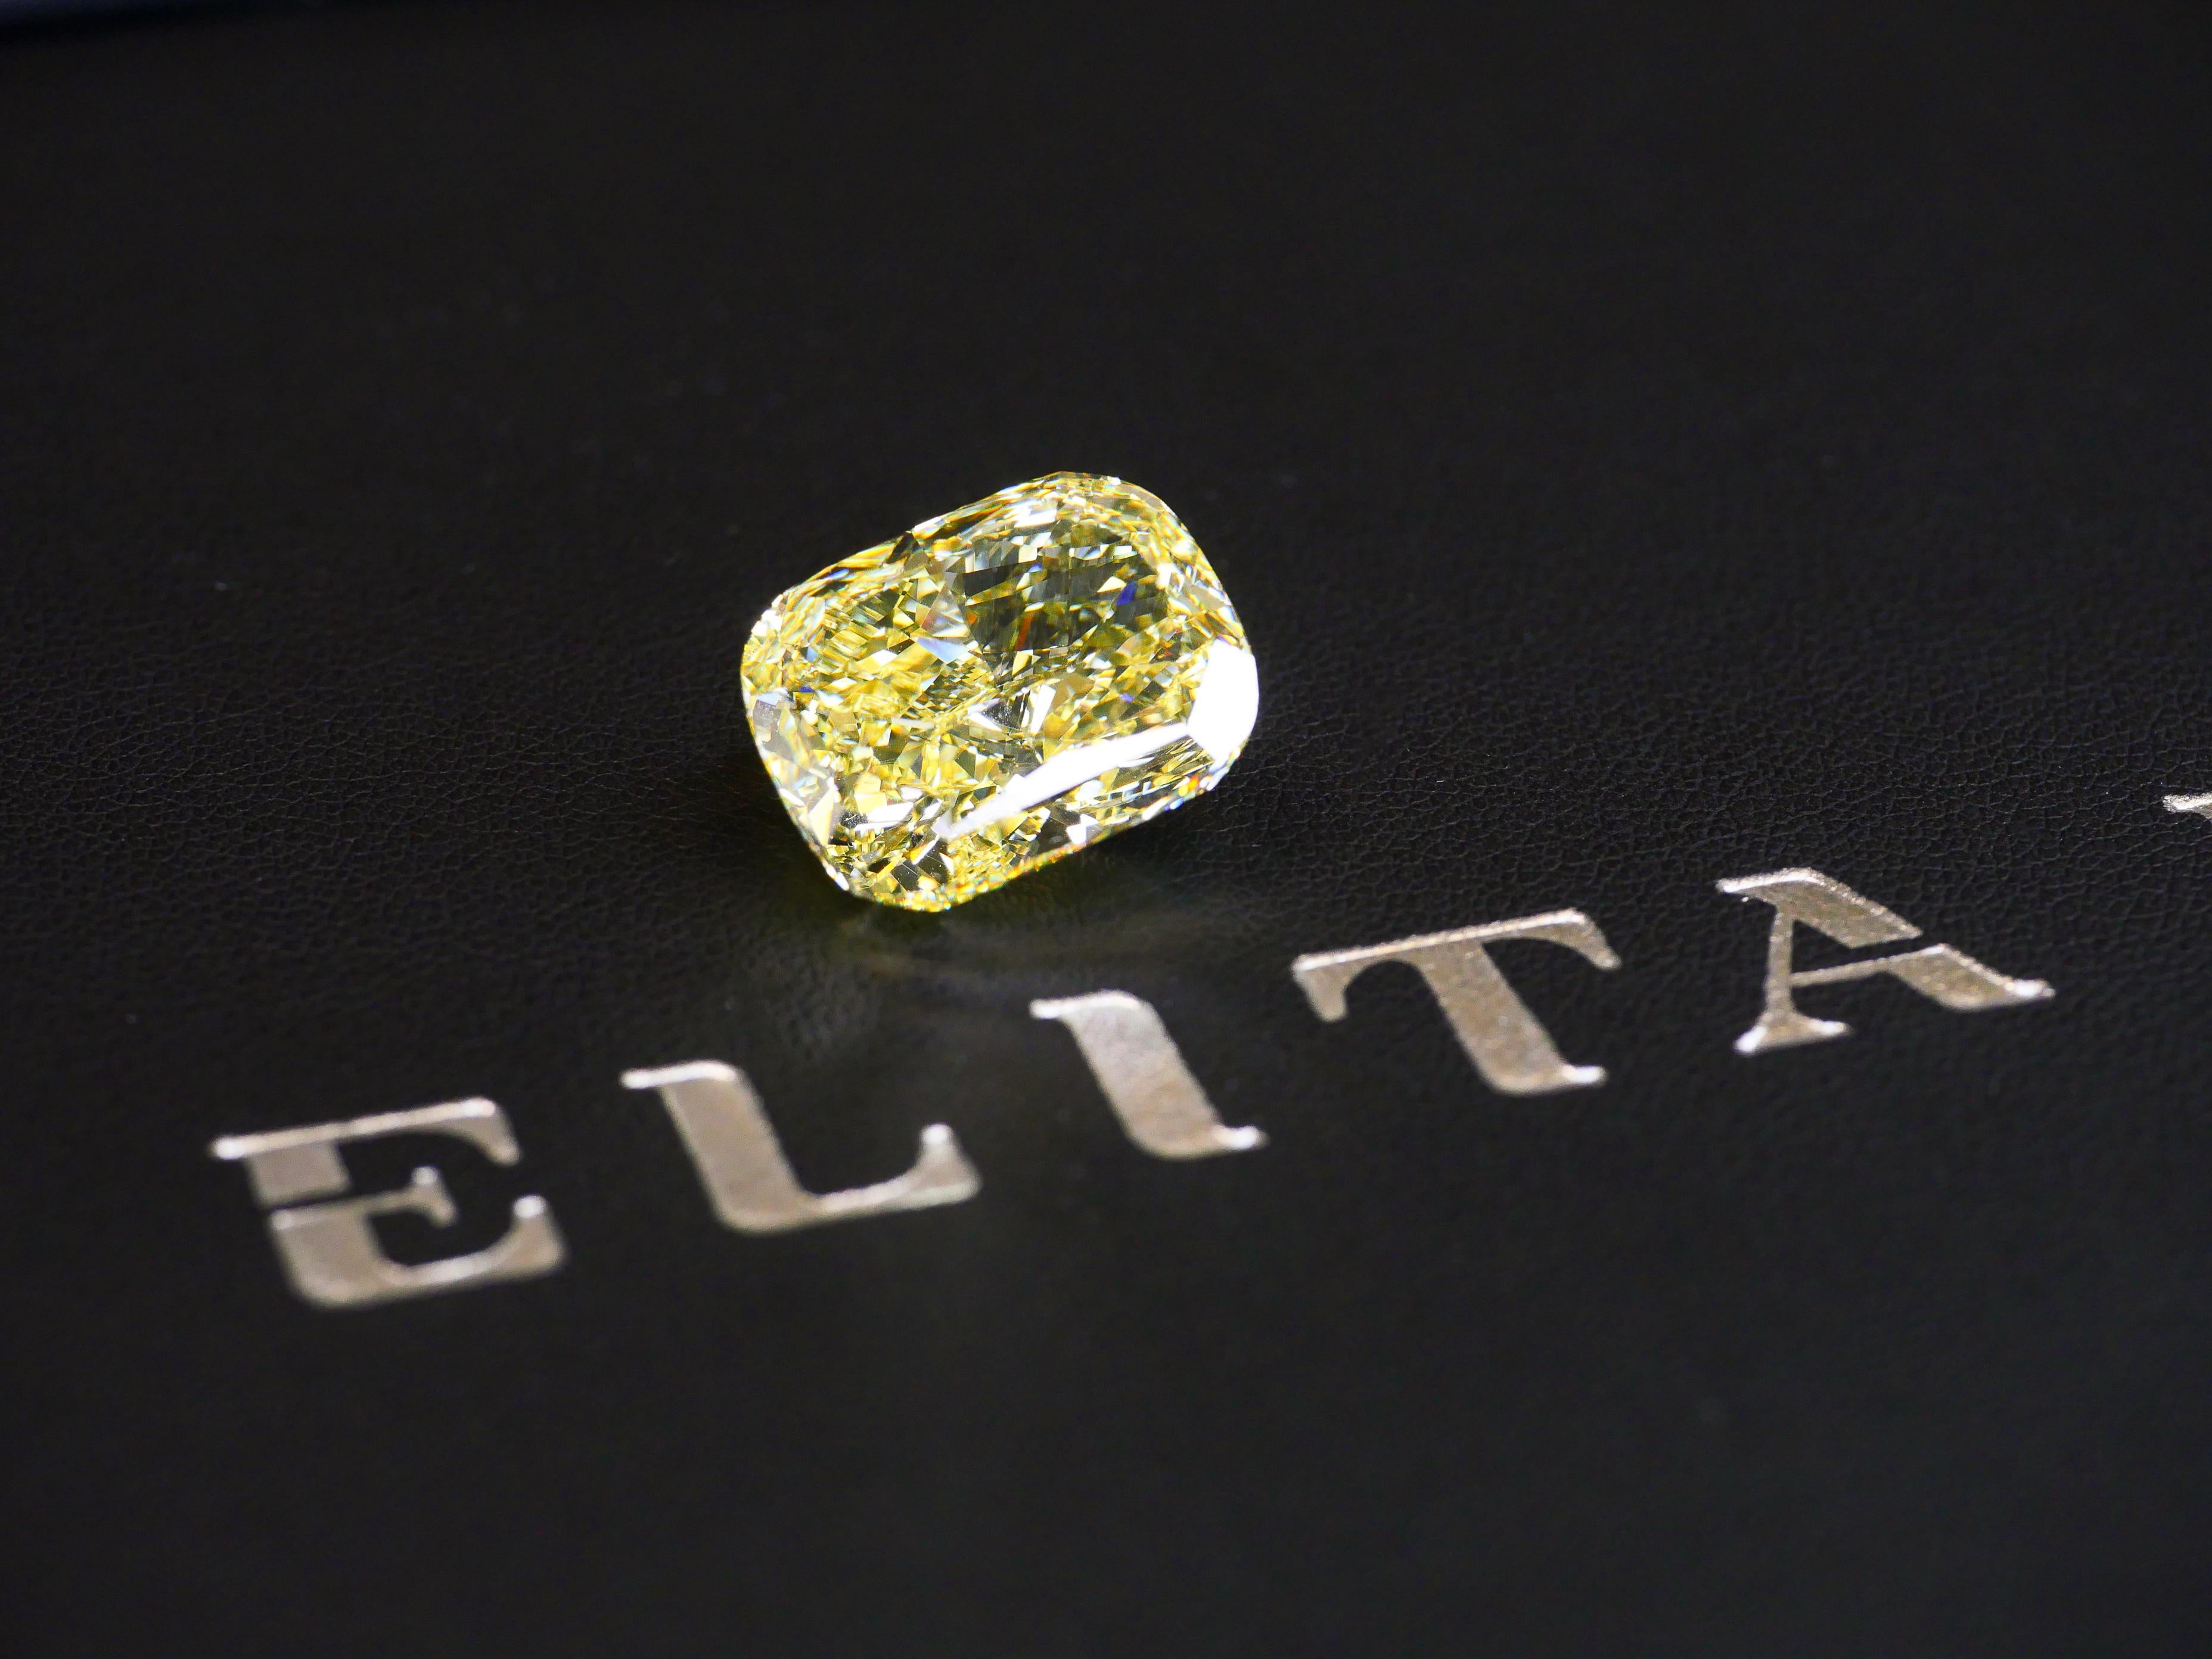 GIA Certified 20.08 Fancy Intense Yellow Cushion Cut Diamond


A combination of rare color and size makes this 20.08 carat canary-colored VS1 cushion cut Natural Fancy Intense Yellow diamond a highly valuable stone.
Fancy colored diamonds are